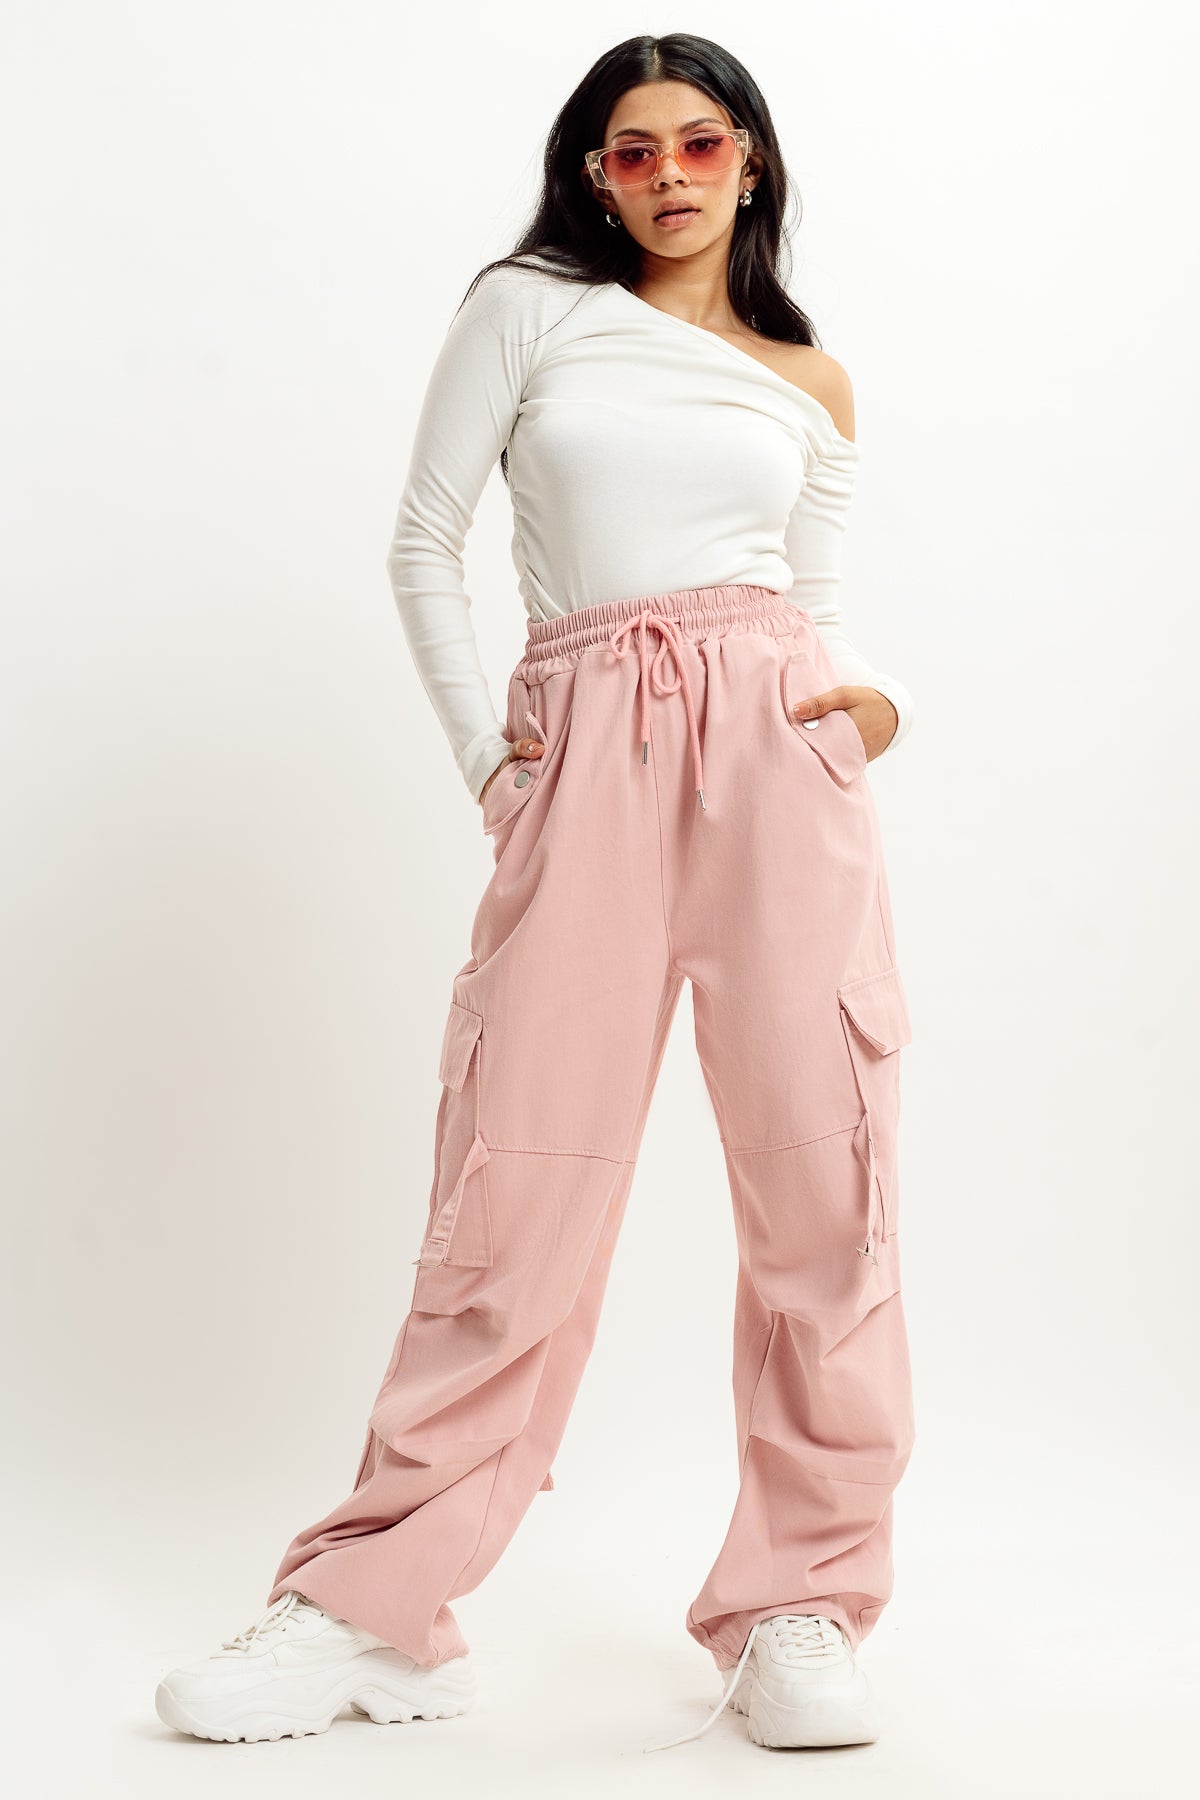 PINK STREET STYLE CARGO PANT